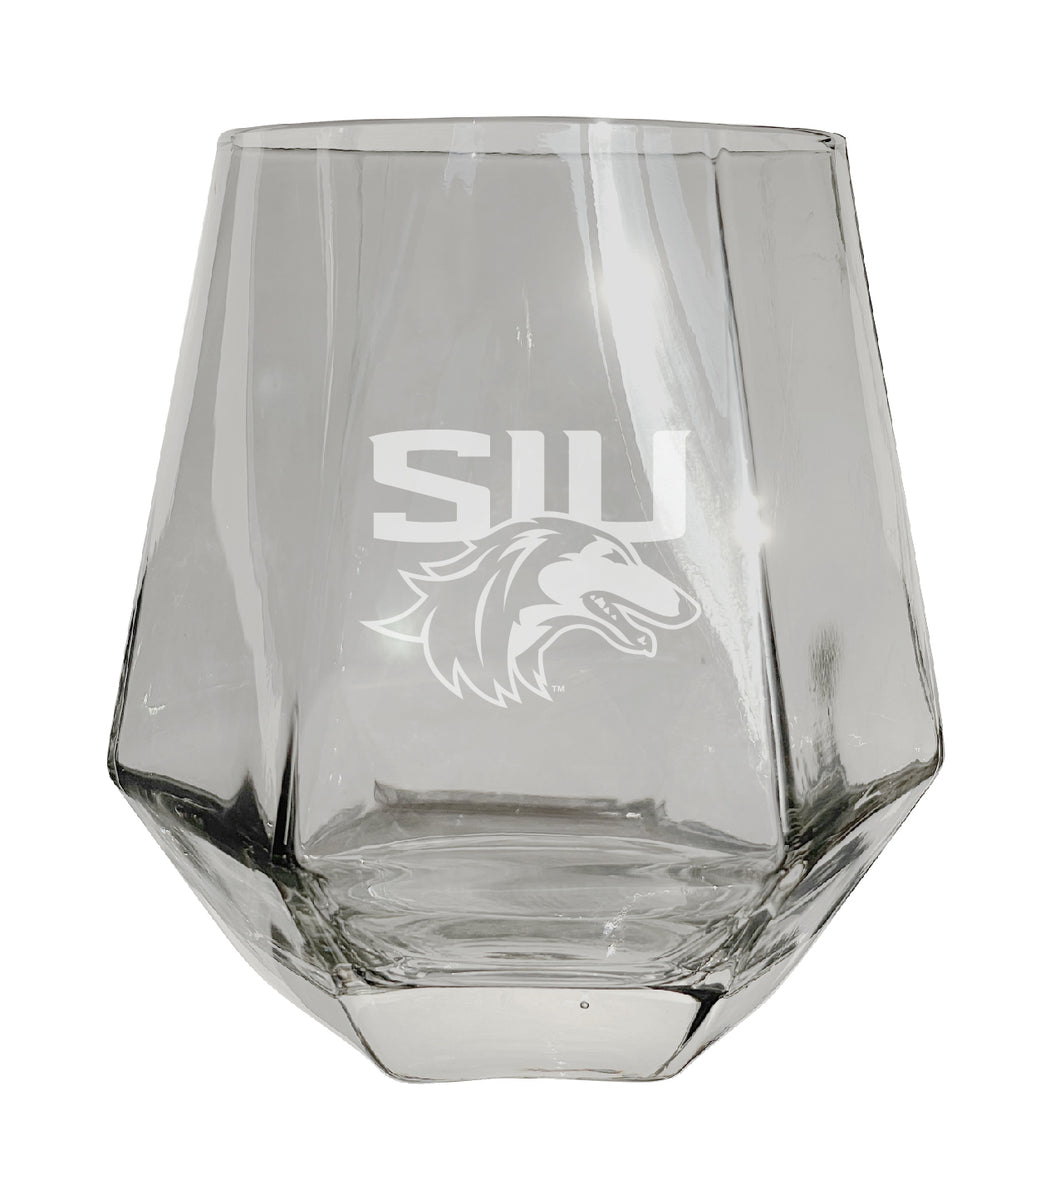 Southern Illinois Salukis Tigers Etched Diamond Cut 10 oz Stemless Wine Glass - NCAA Licensed